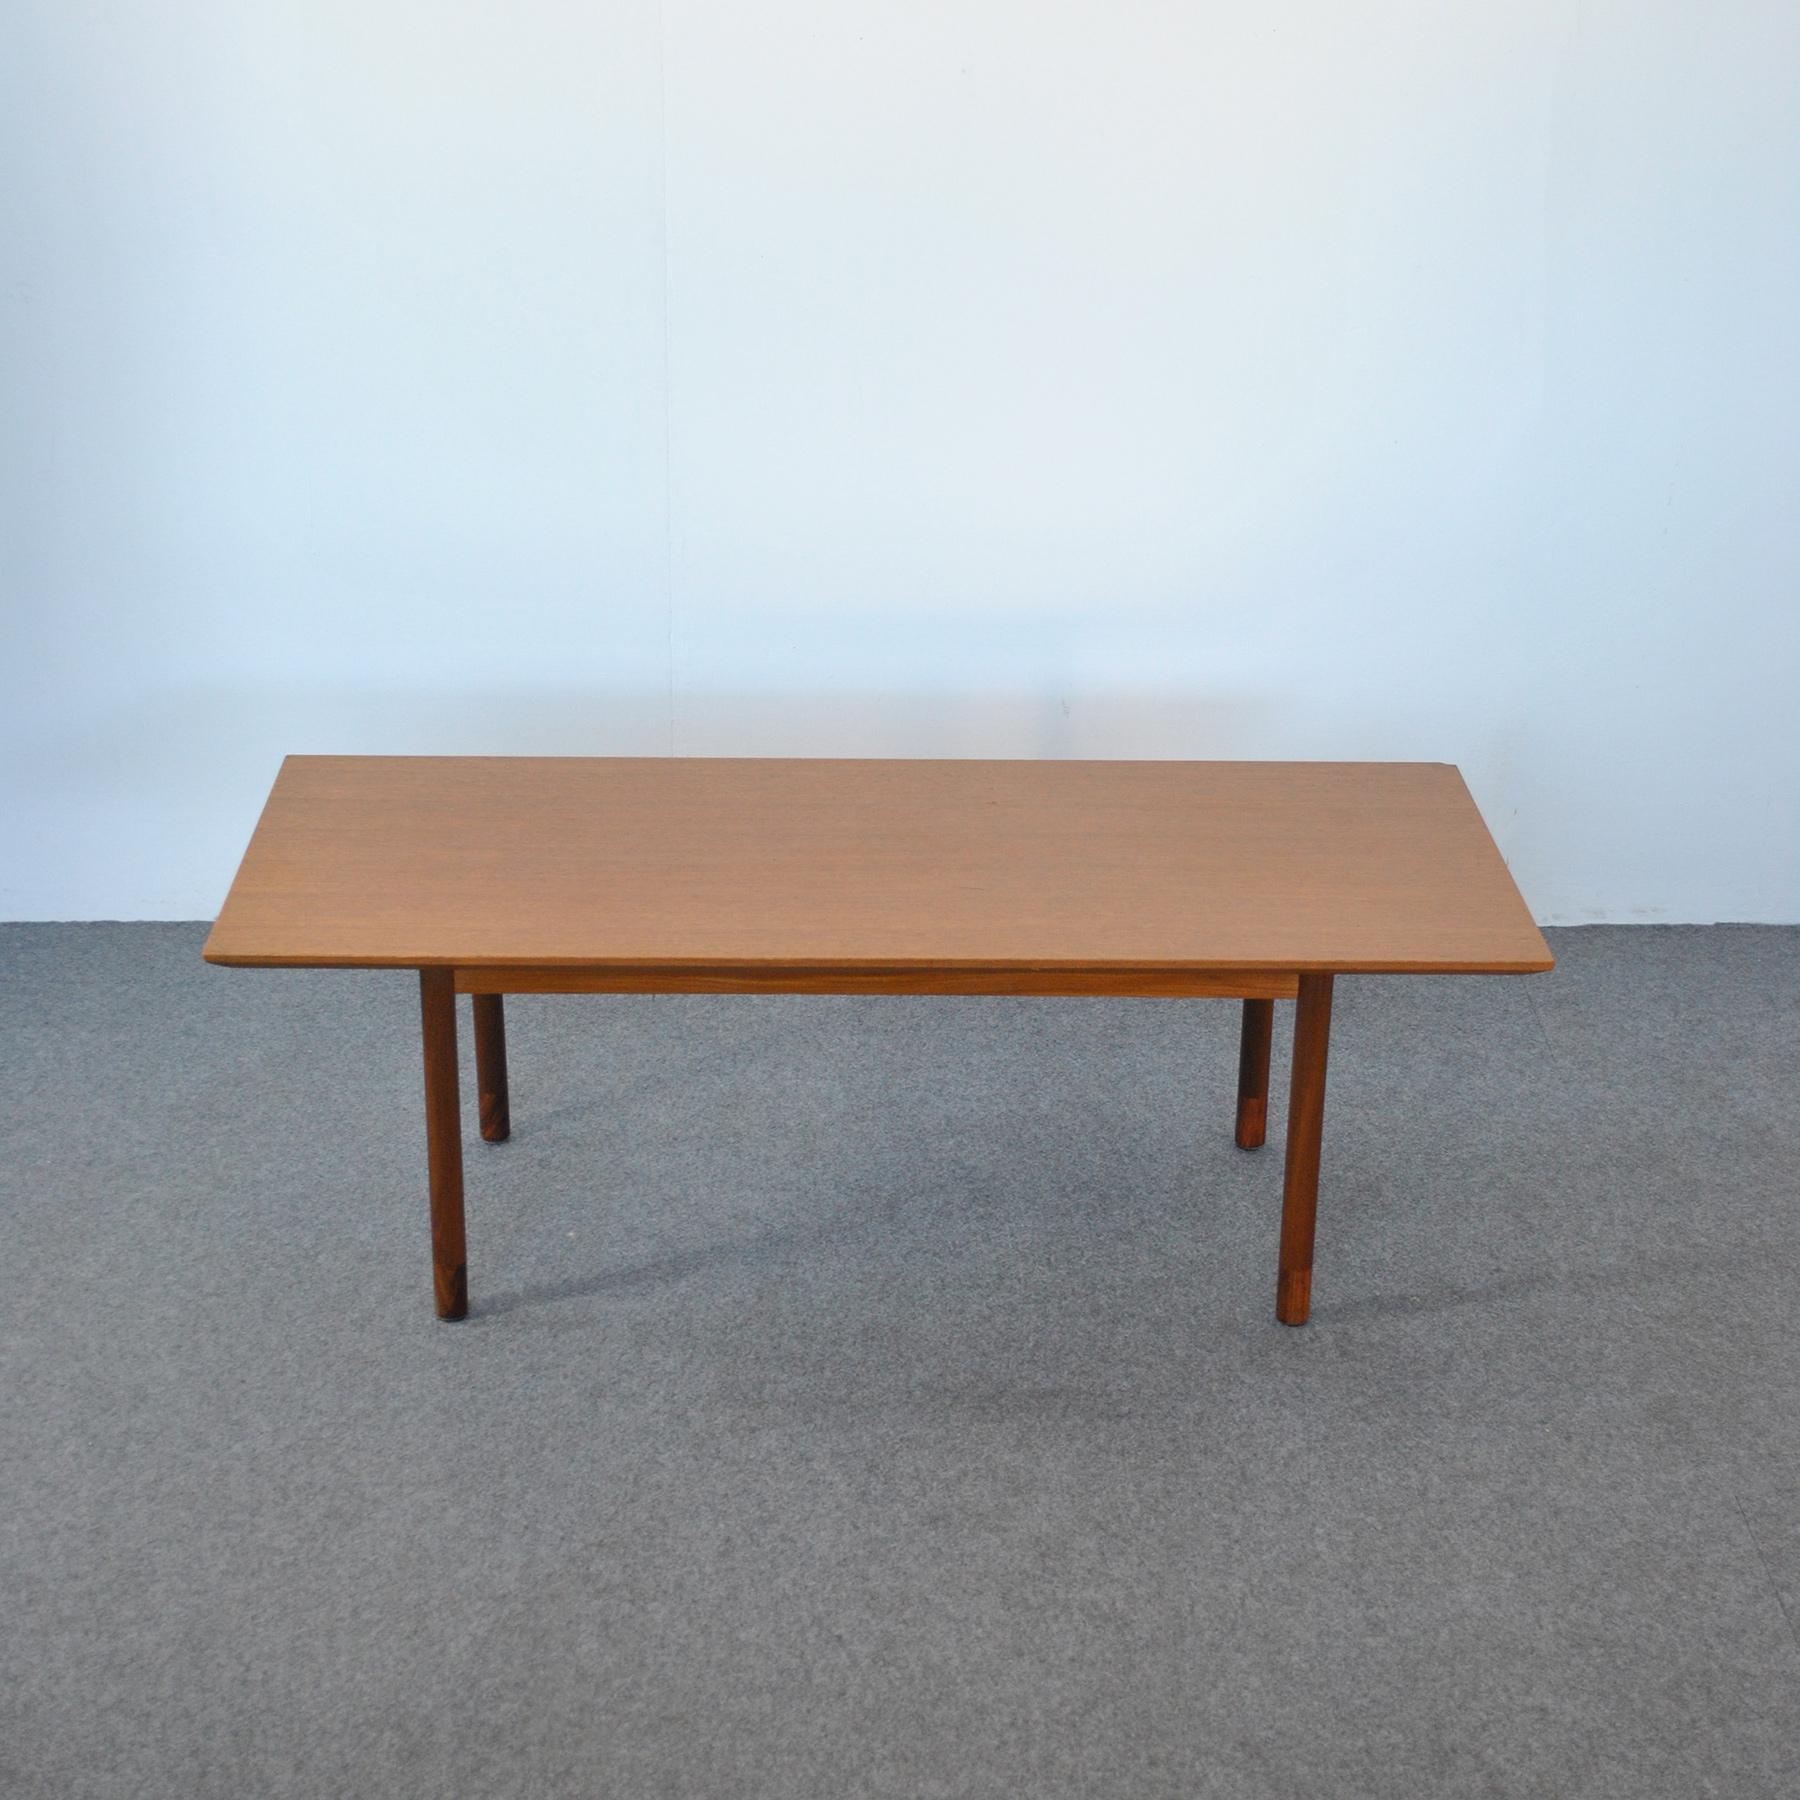 Wooden coffee table produced by 3V Arredamenti Padova Italy 1960s.